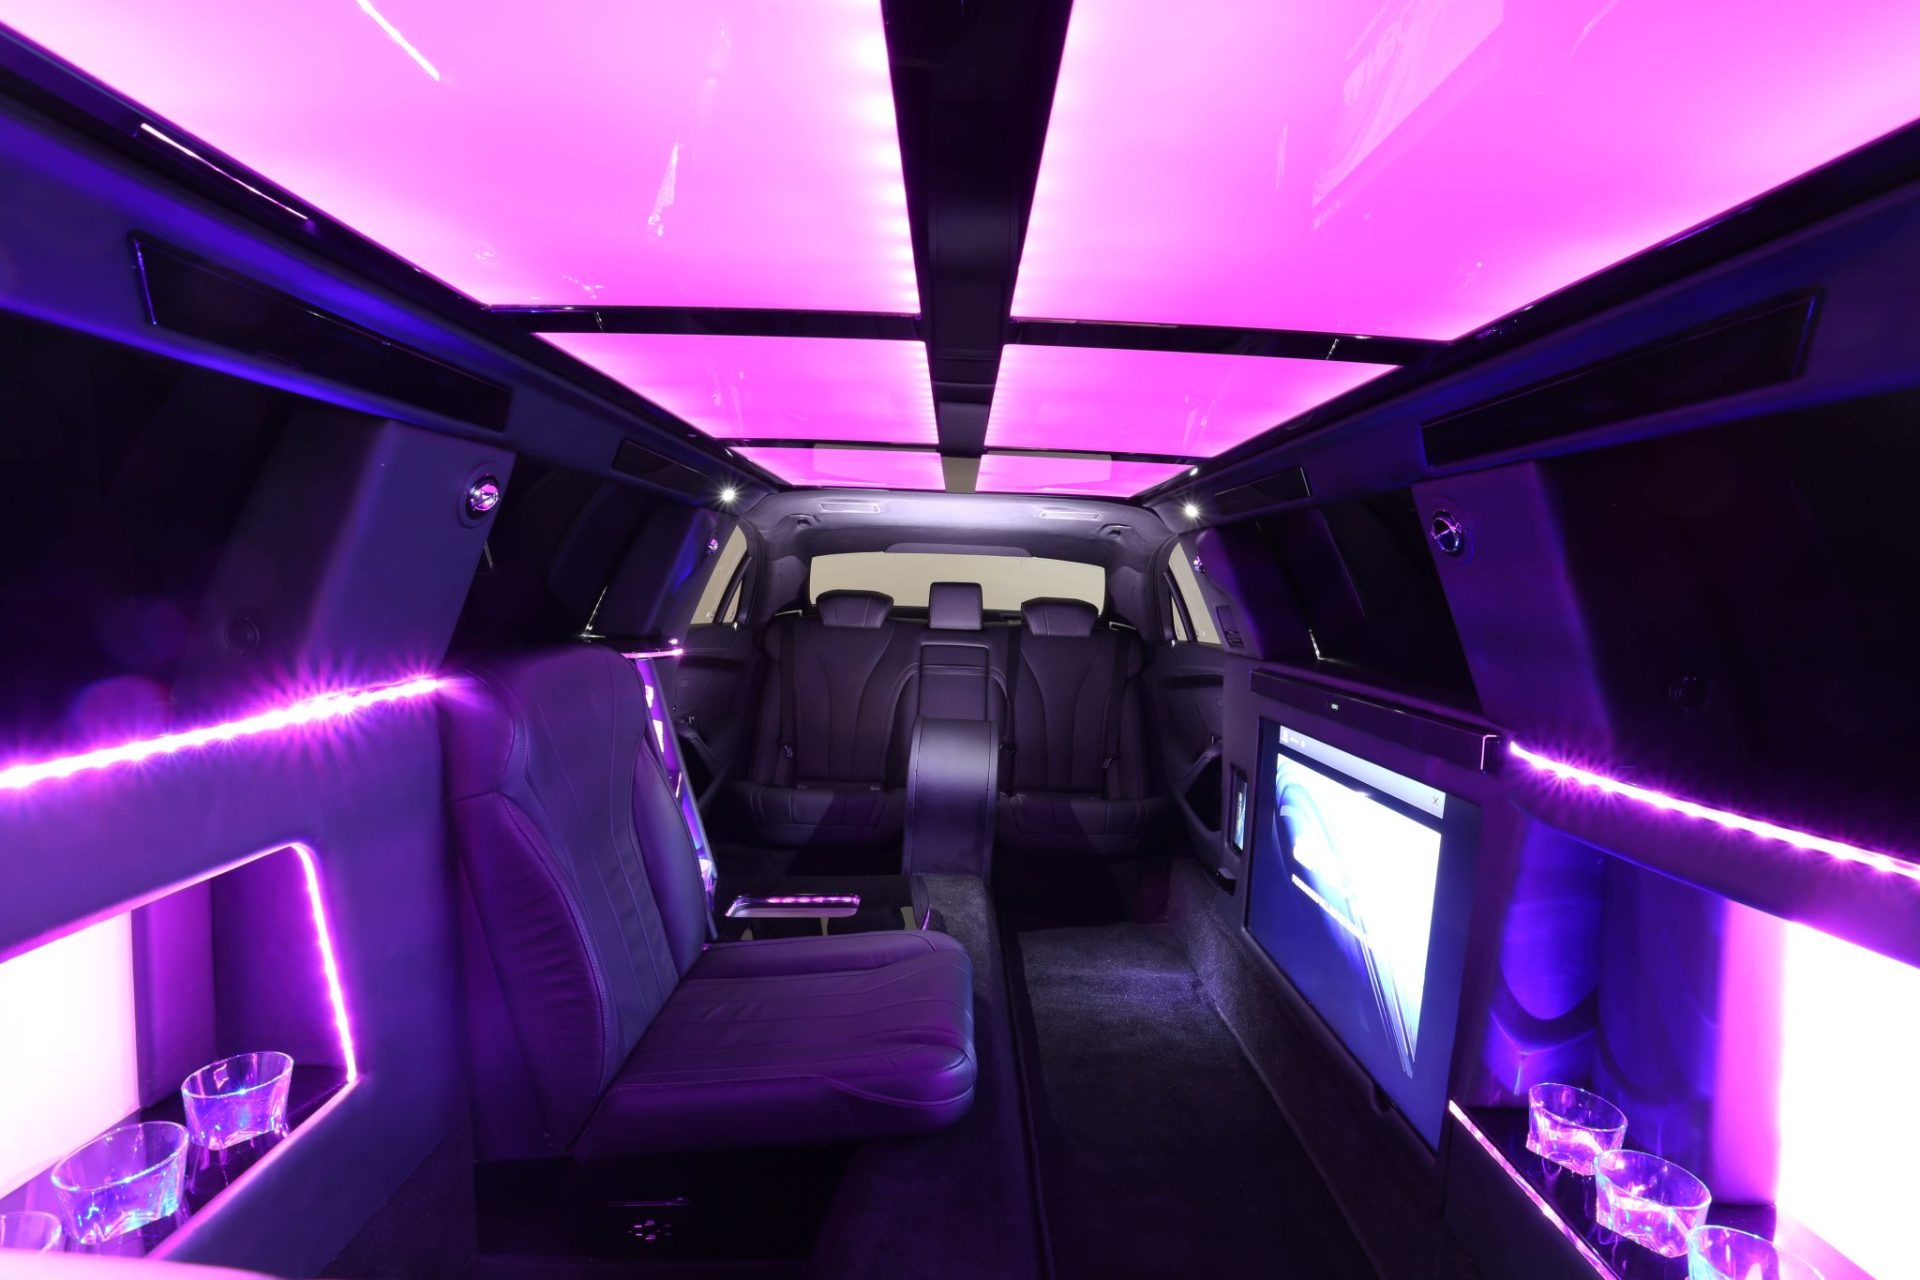 Mercedes Benz S-Class Stretched Limousine - Interior Photo #40